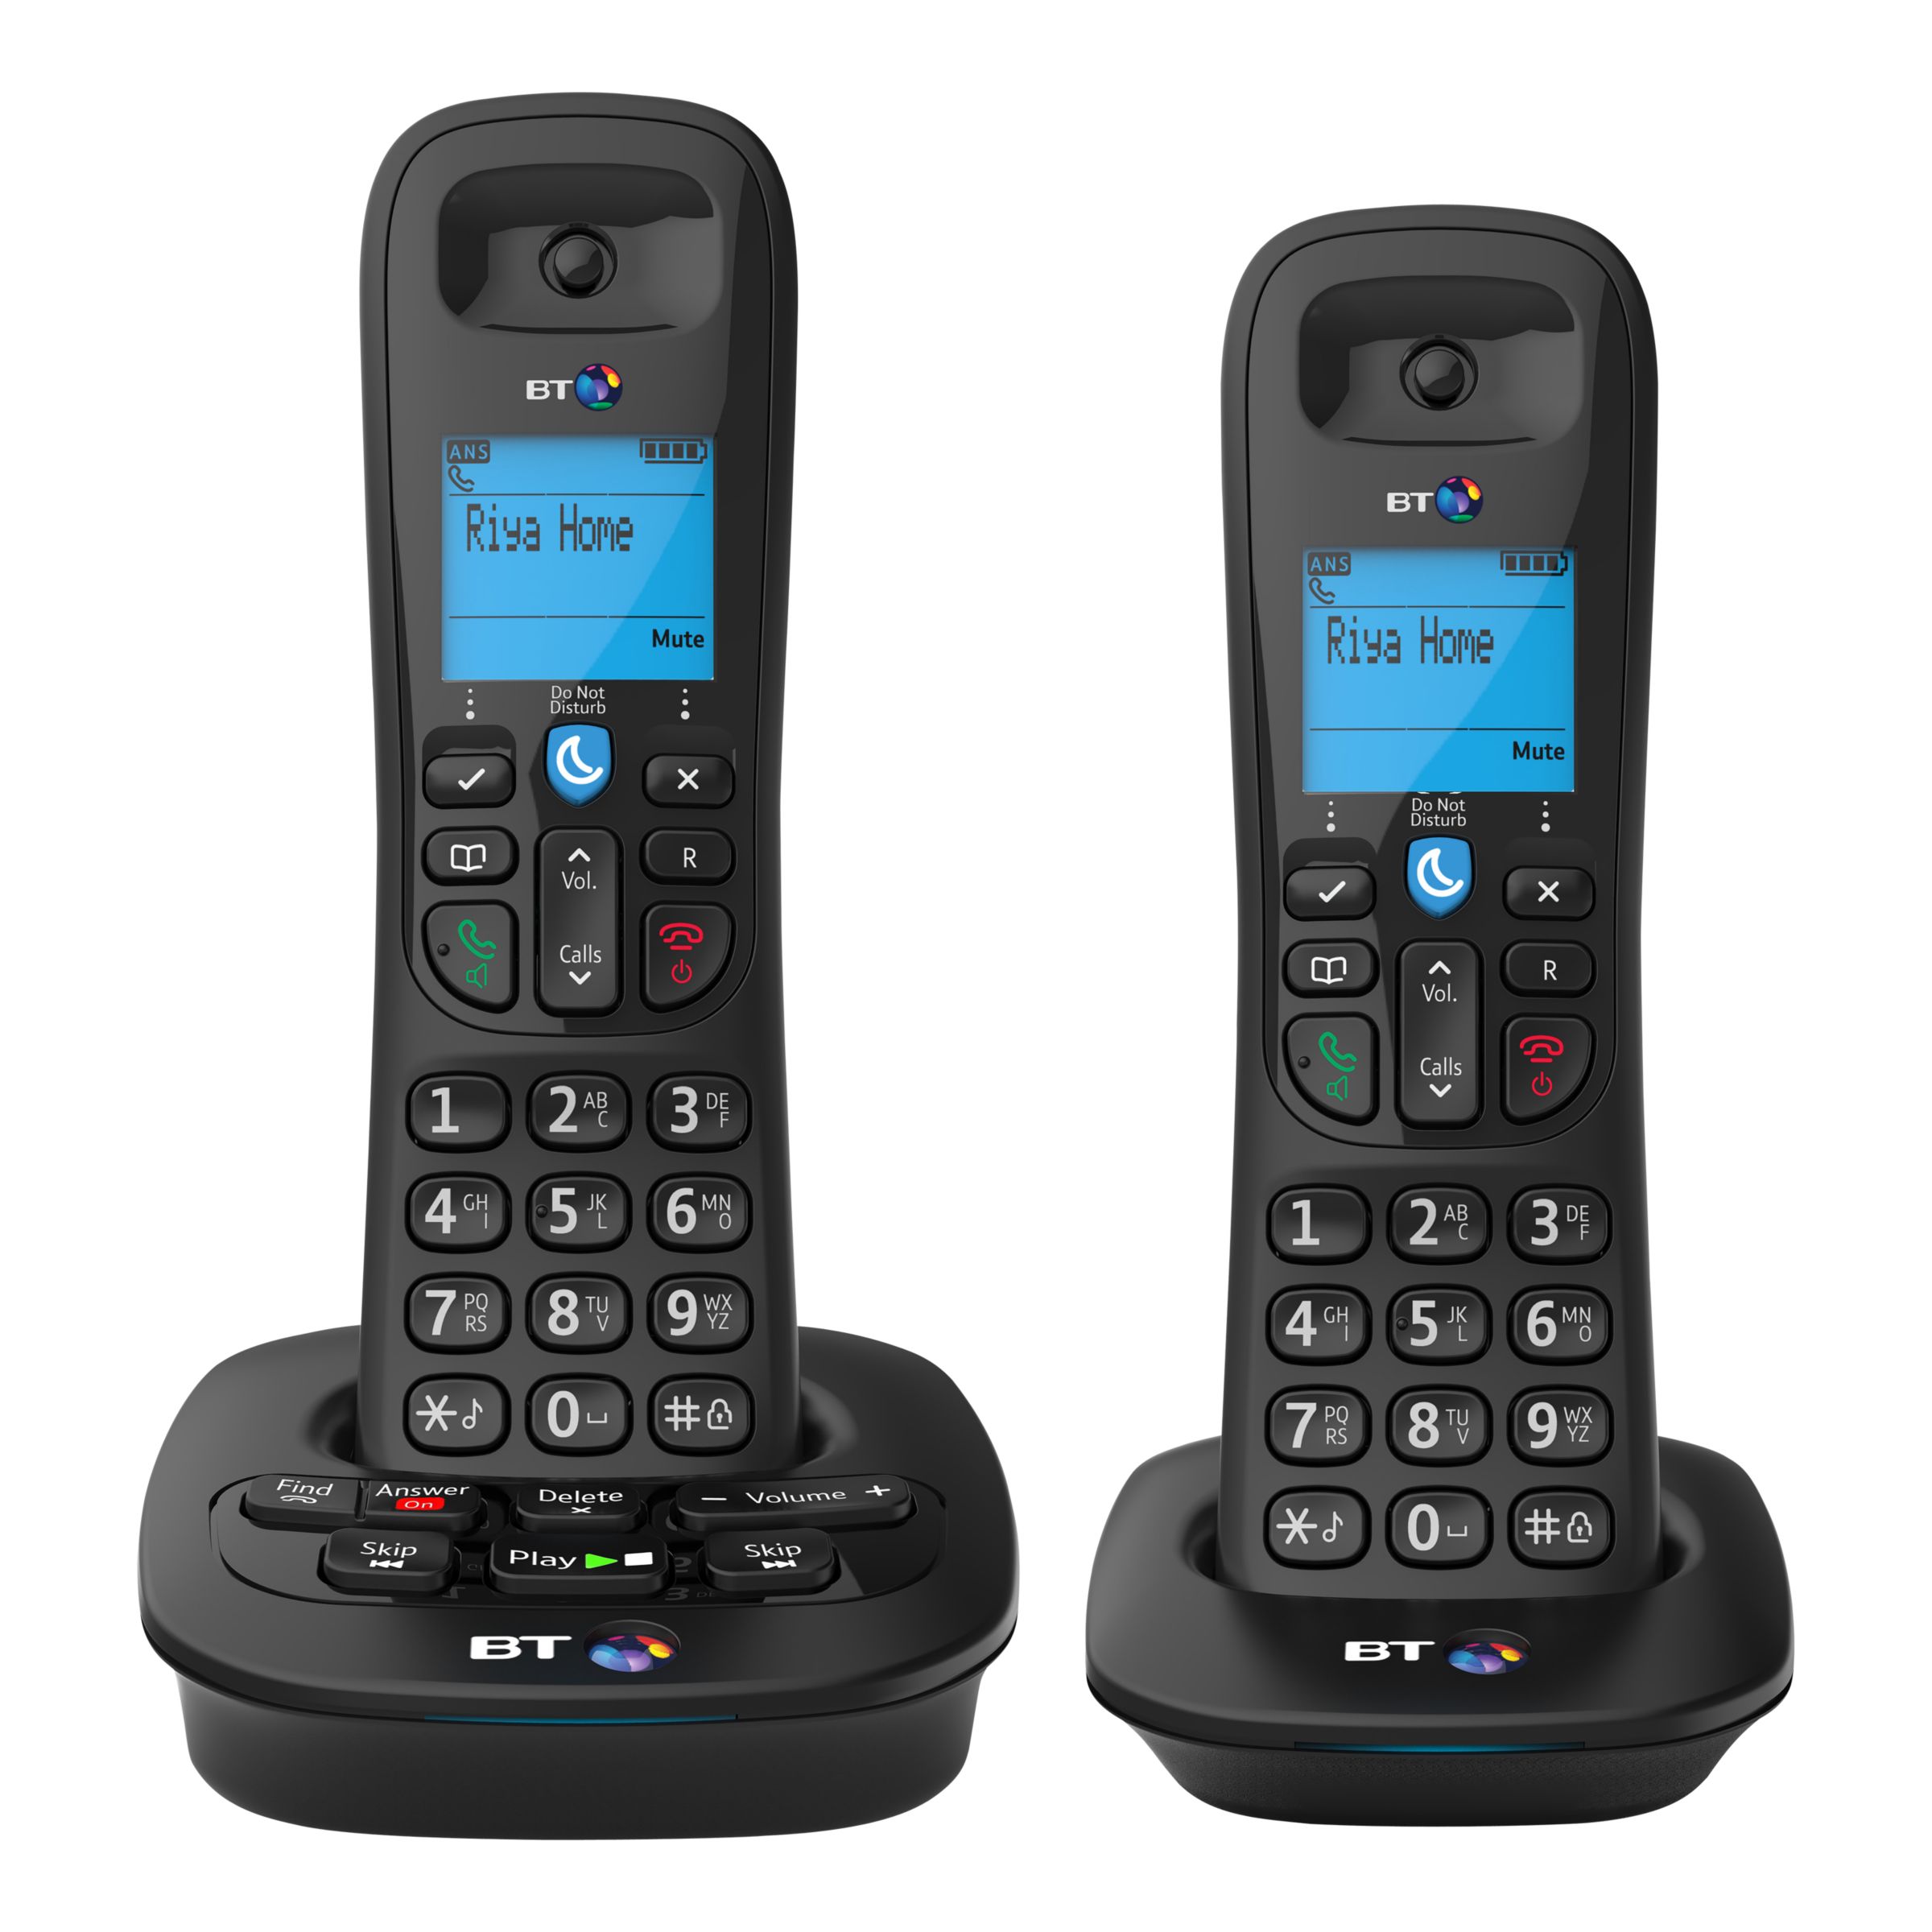 BT 3940 Digital Cordless Phone with Answering Machine, Twin DECT